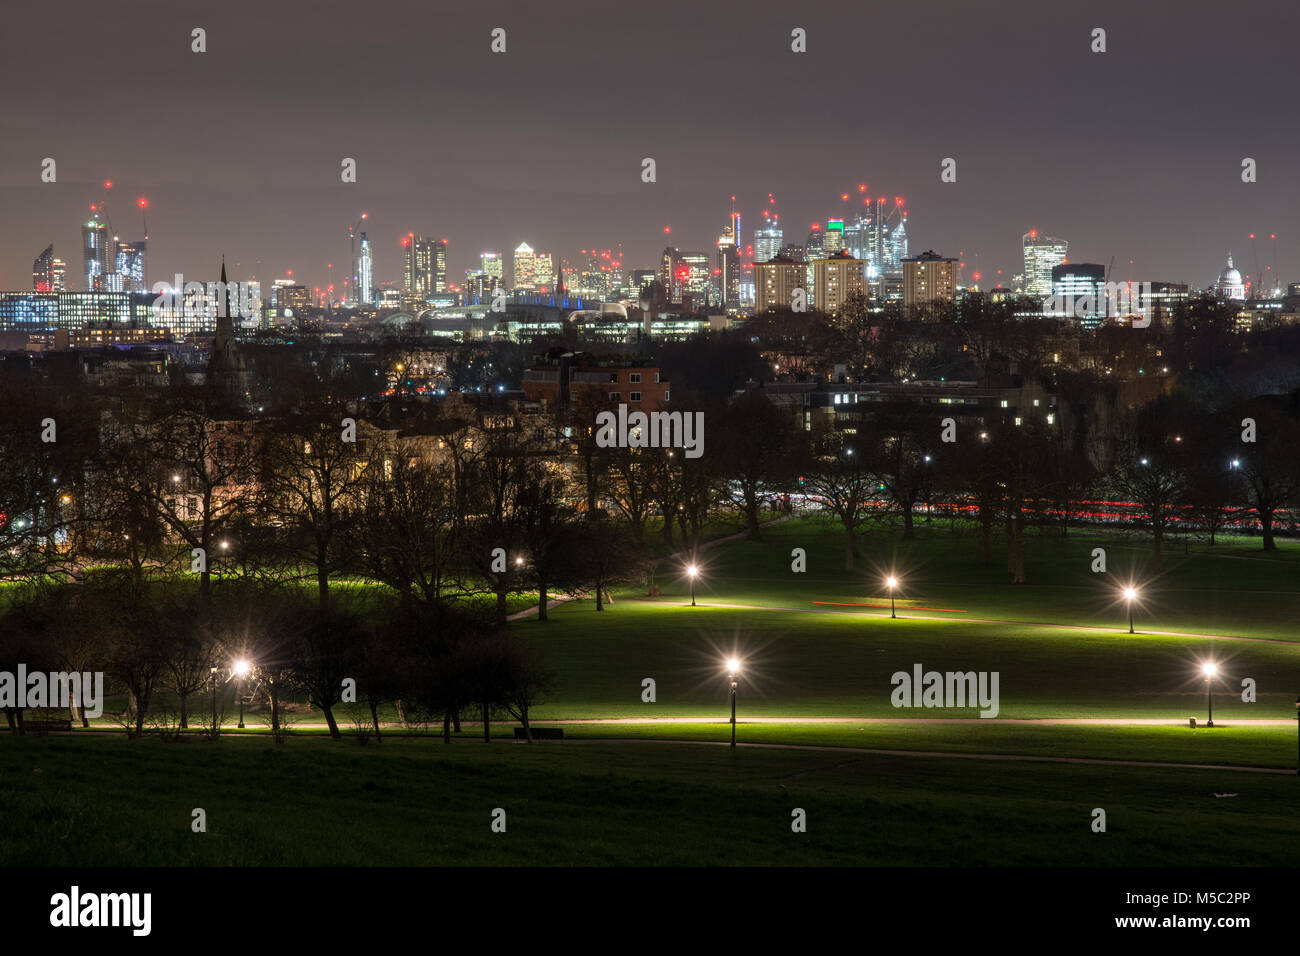 London, England, UK - February 2, 2018: Skyscrapers and landmarks in the London skyline are lit up at night as viewed from Primrose Hill, with Regent' Stock Photo